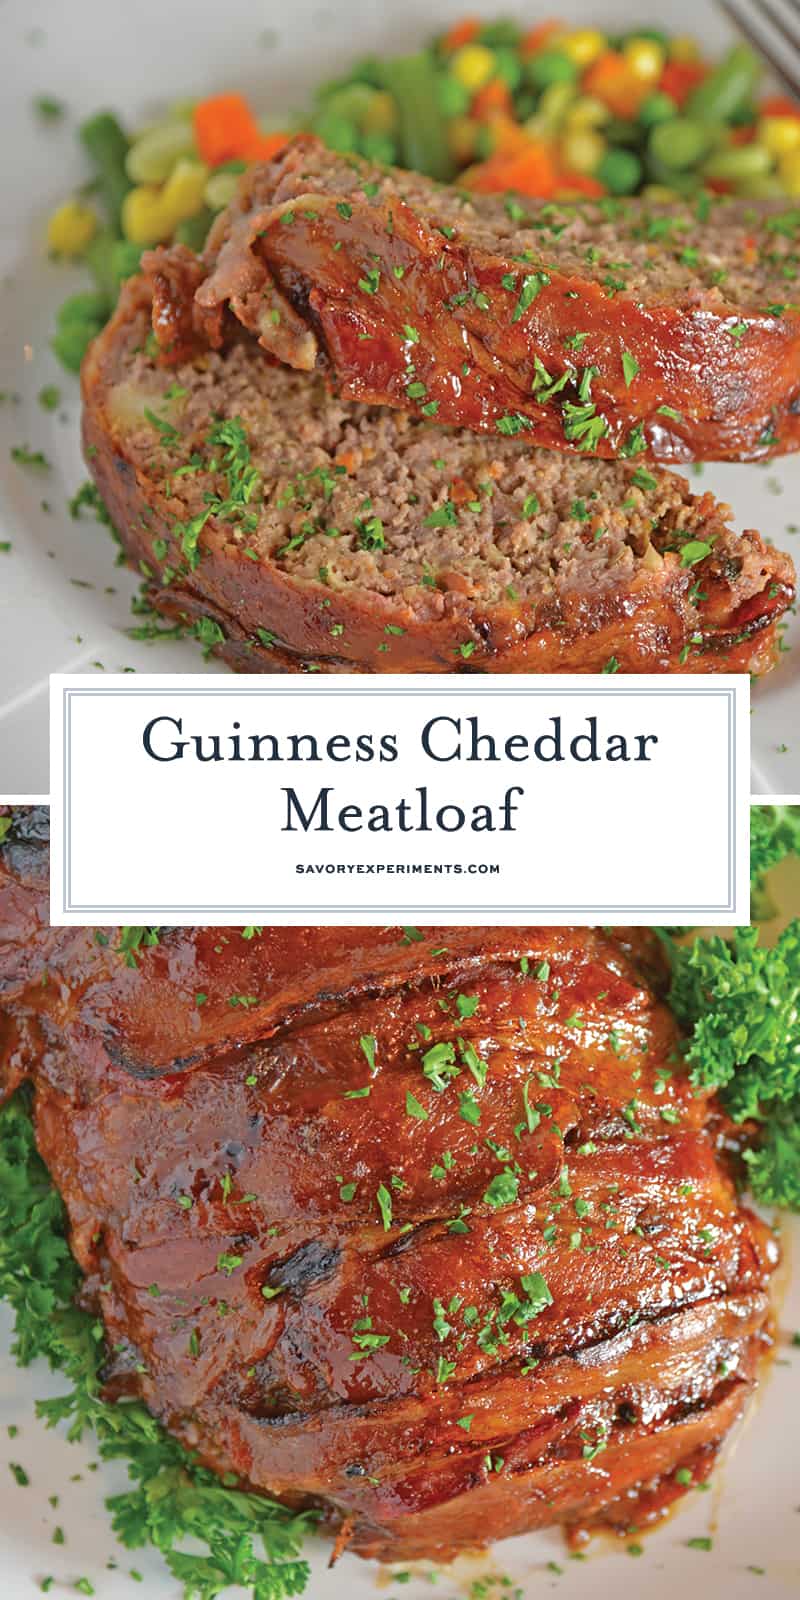 Guinness and Cheddar Meatloaf is packed with vegetables simmered in stout beer and fresh sage topped with crispy bacon and a sweet molasses glaze. #baconwrappedmeatloaf #easymeatloafrecipes www.savoryexperiments.com 